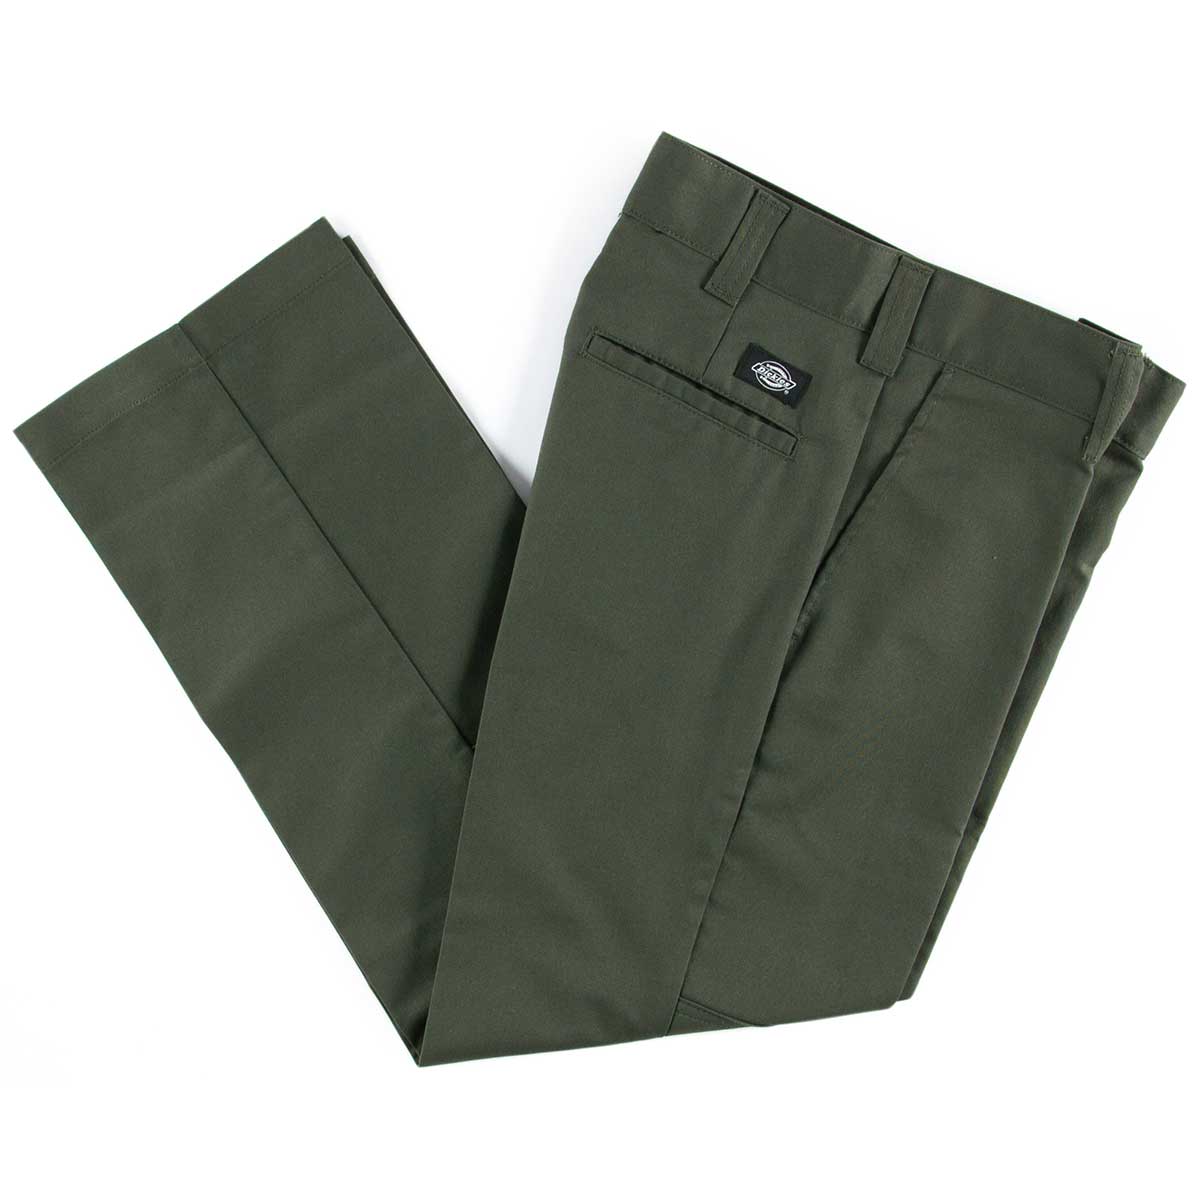 Relaxed Fit Heavyweight Duck Carpenter Pants, Rinsed Moss Green